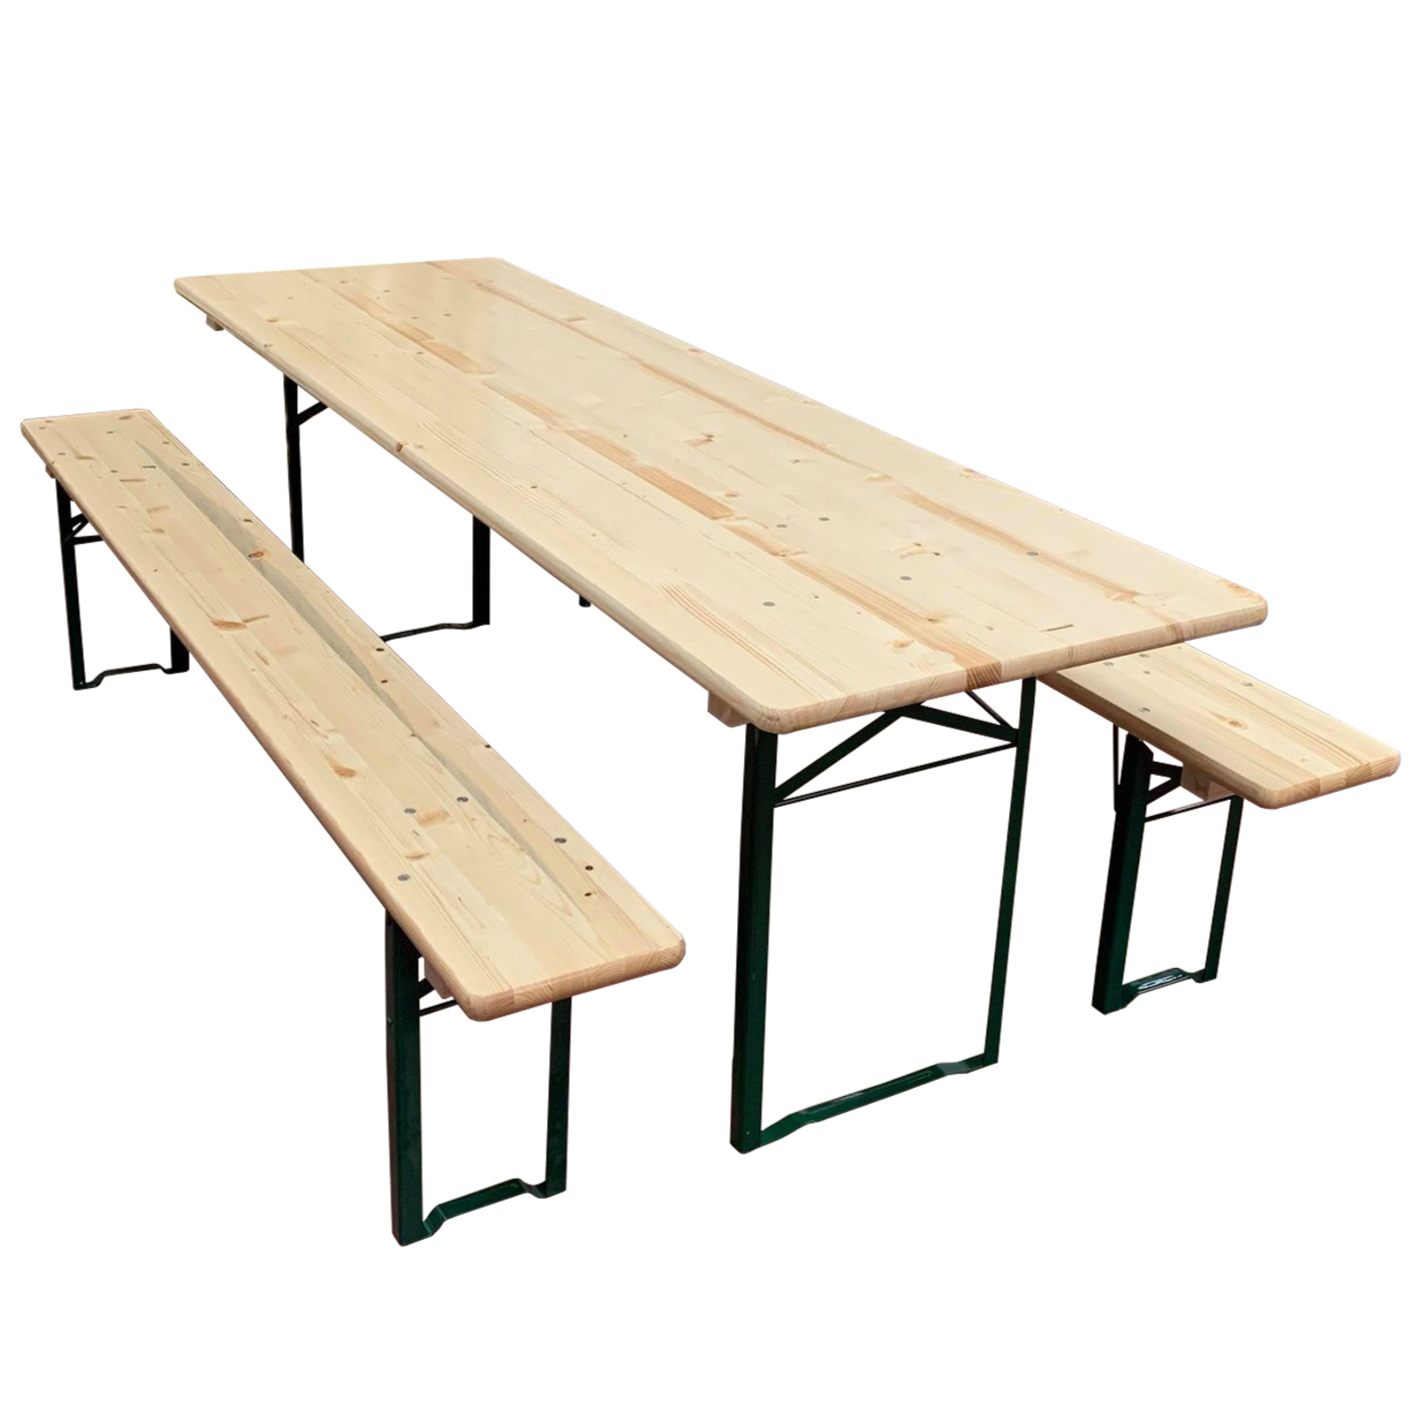 6,5ft Beer set table 200x70cm (benches sold separately) / steel corner legs